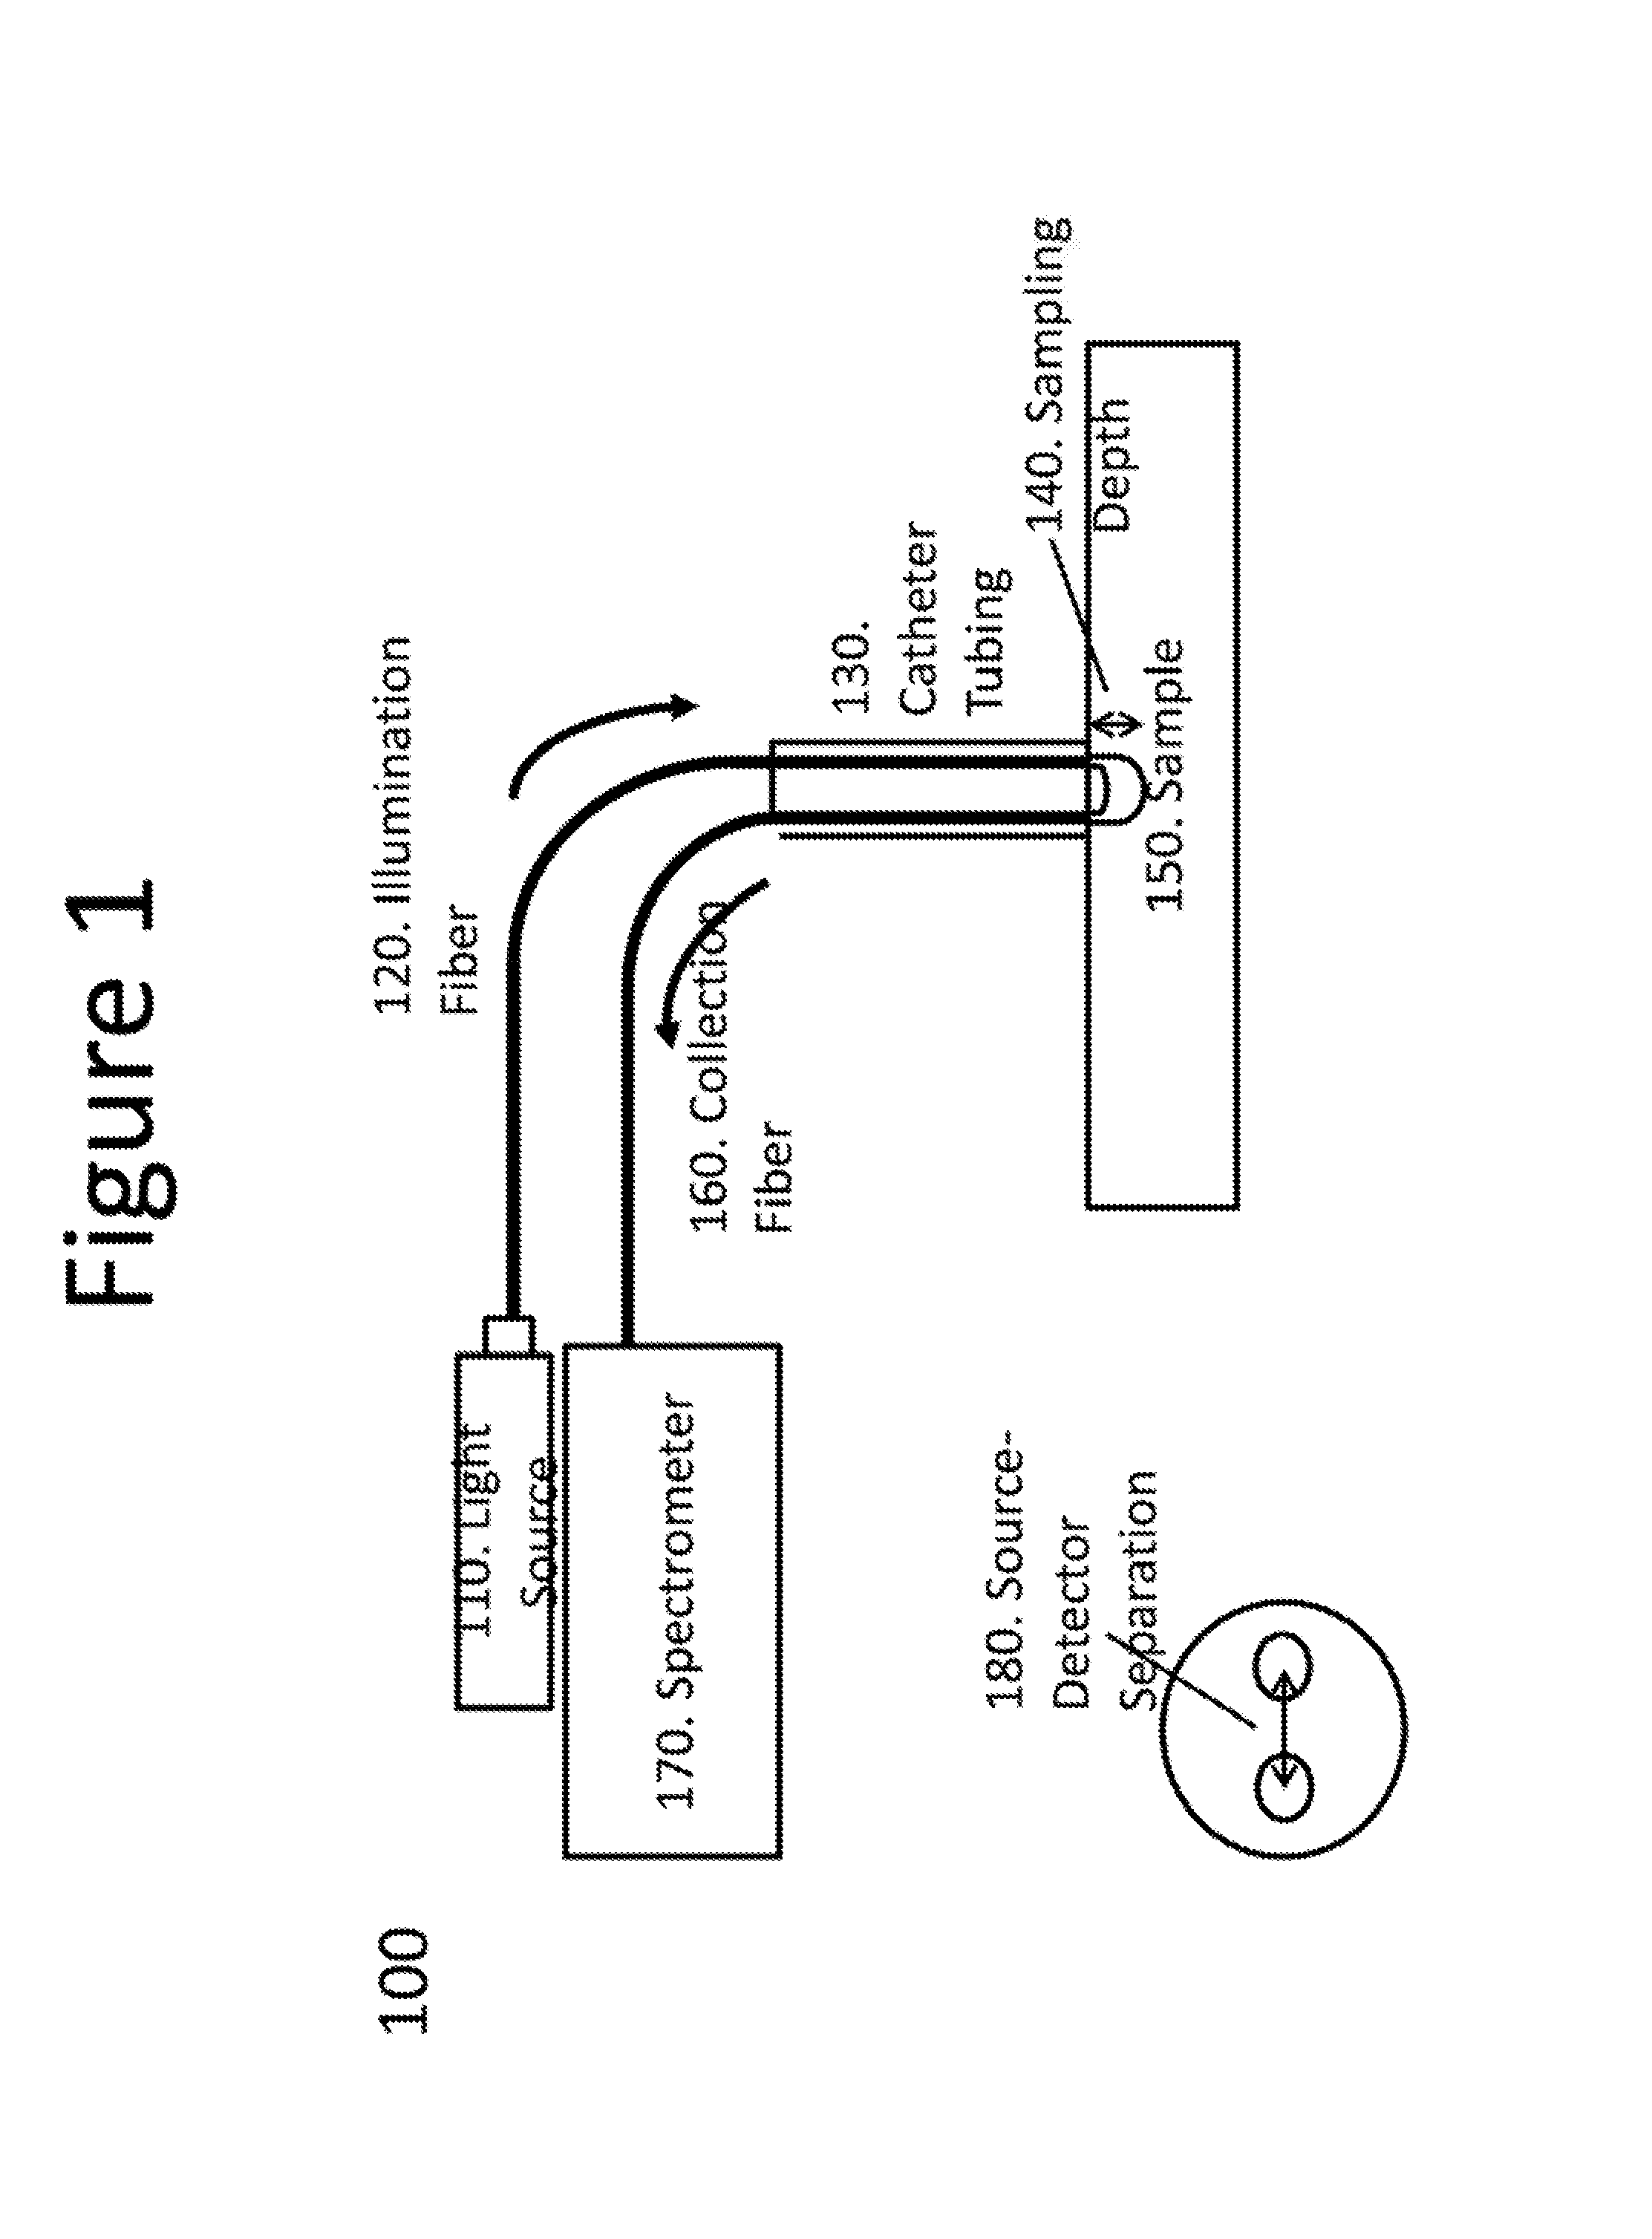 System, method and computer-accessible medium for characterization of tissue